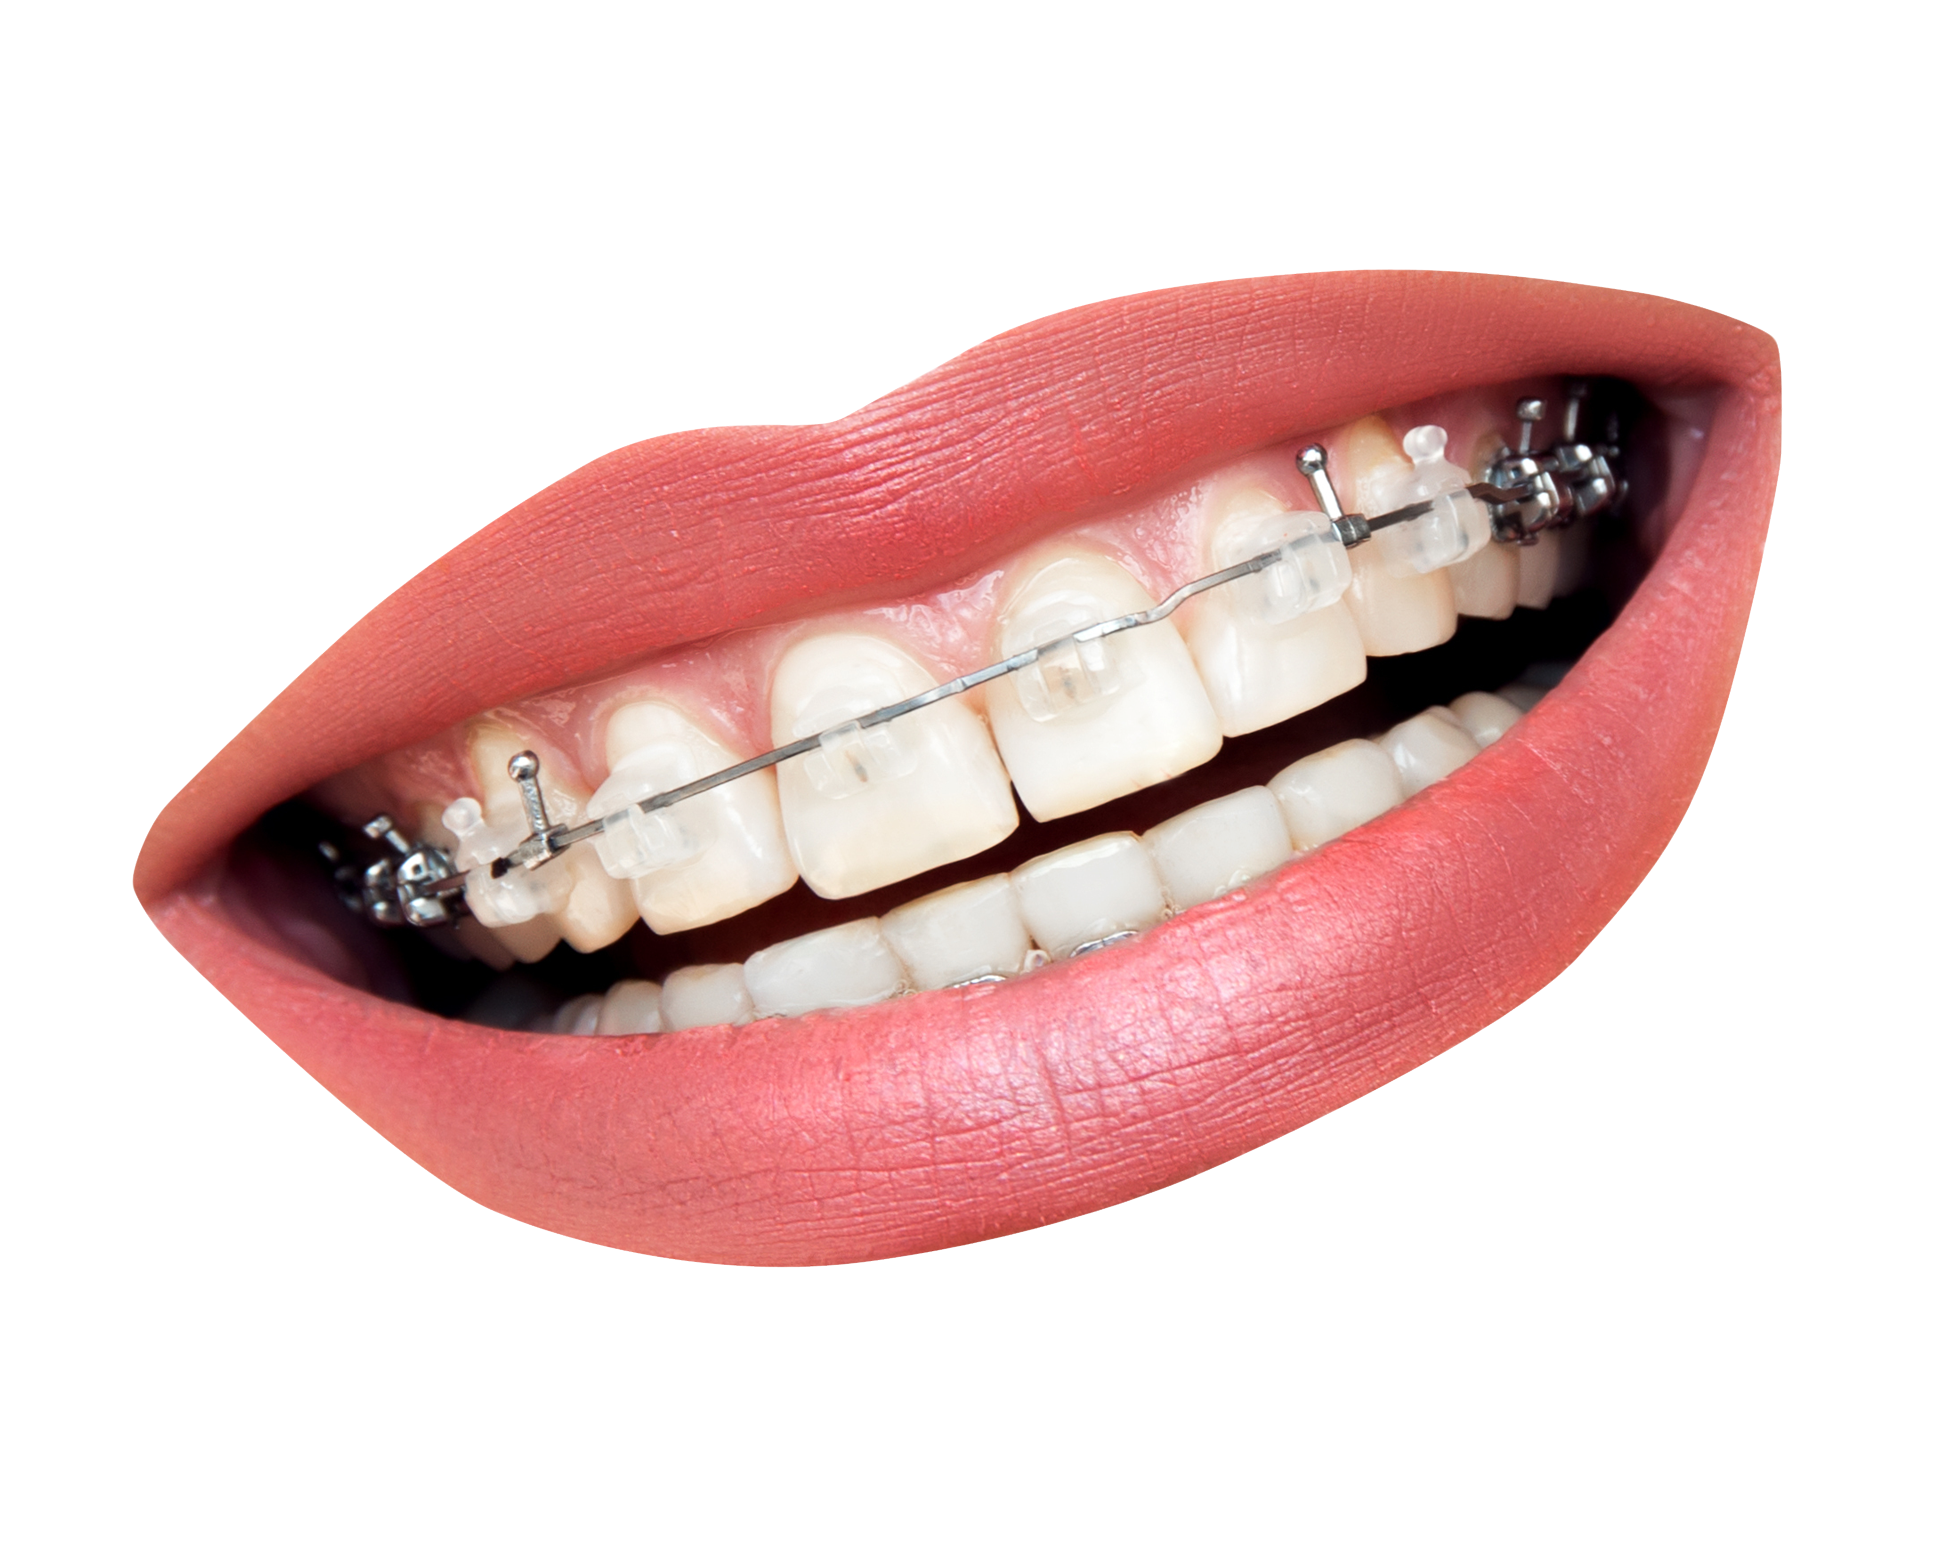 A Close Up Of A Mouth With Braces